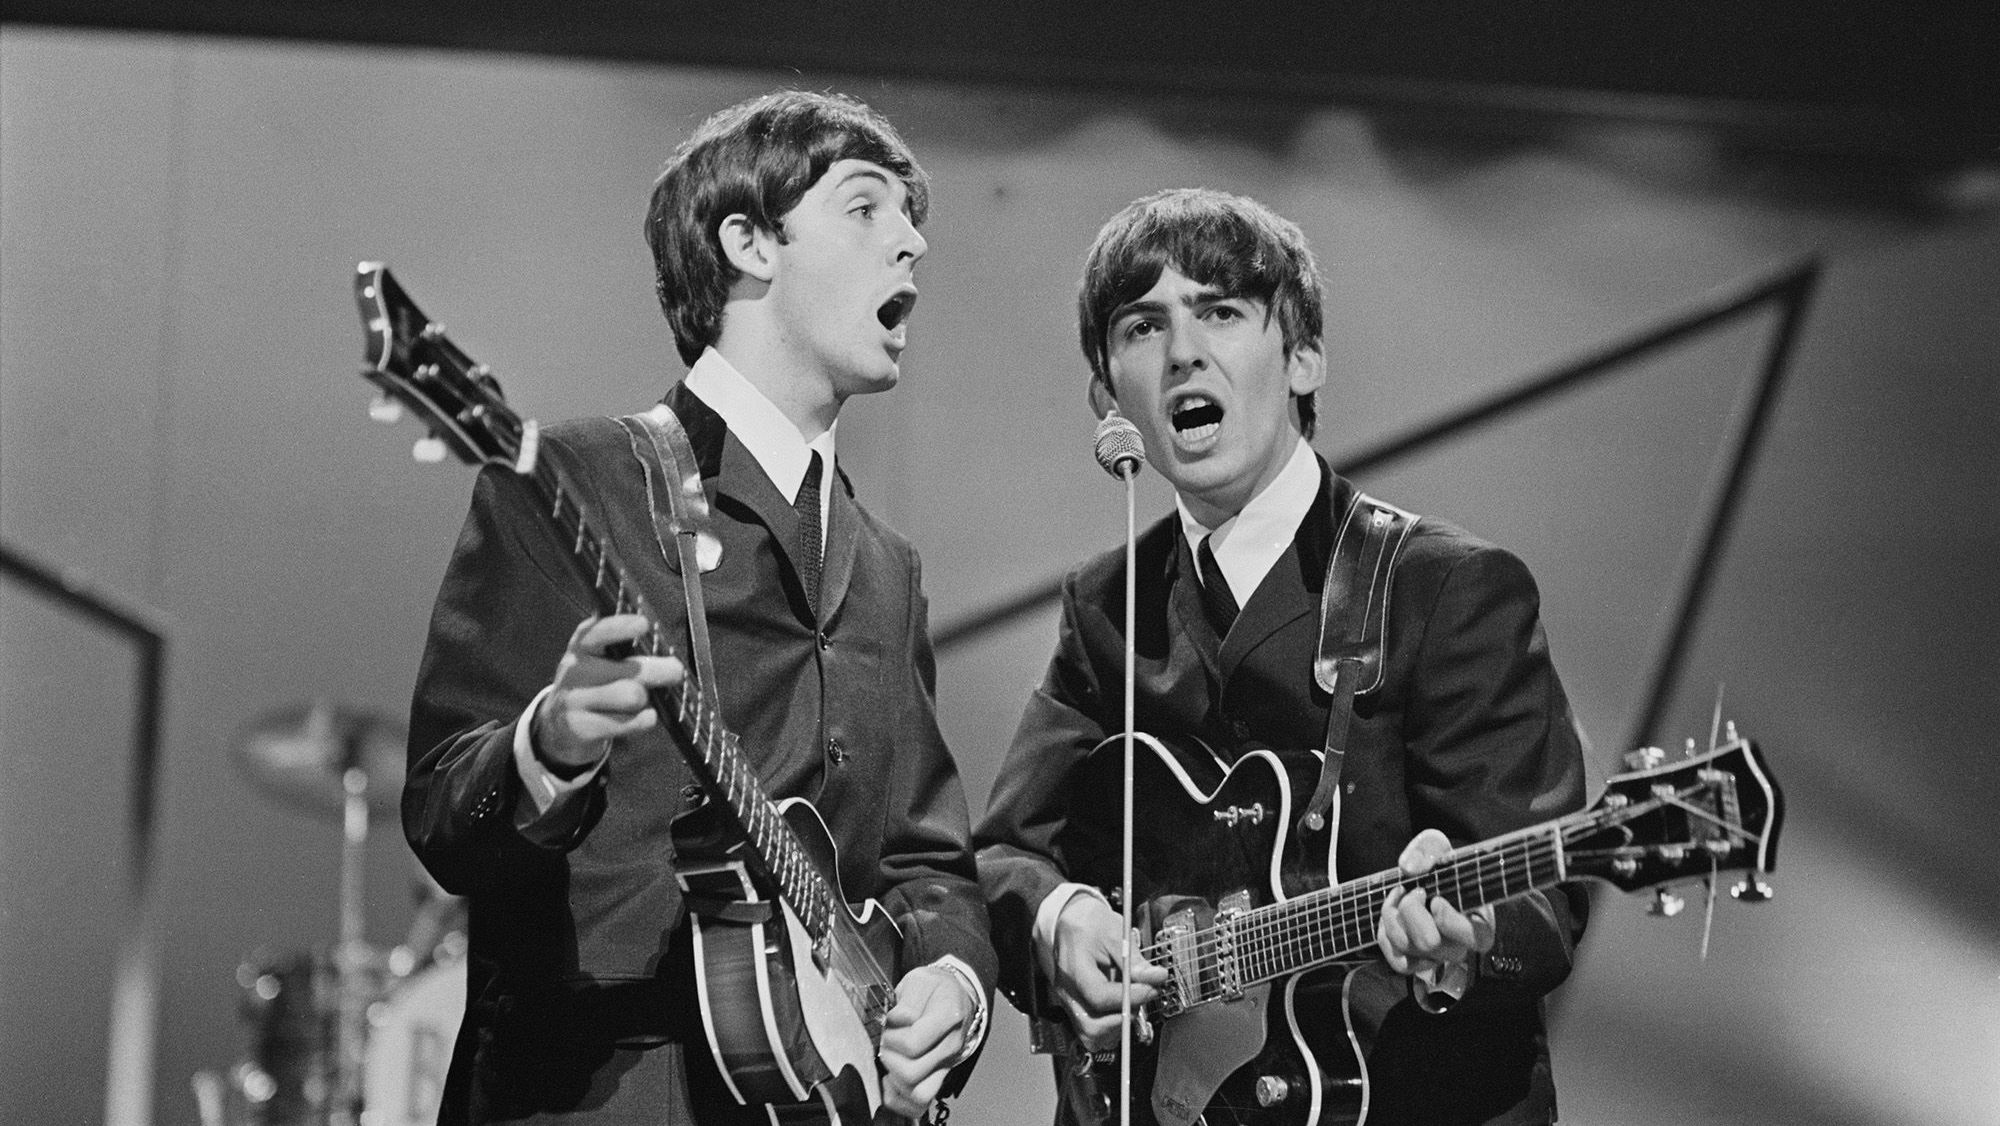 Paul McCartney reunites with stolen guitar that “sparked Beatlemania” 50 years later